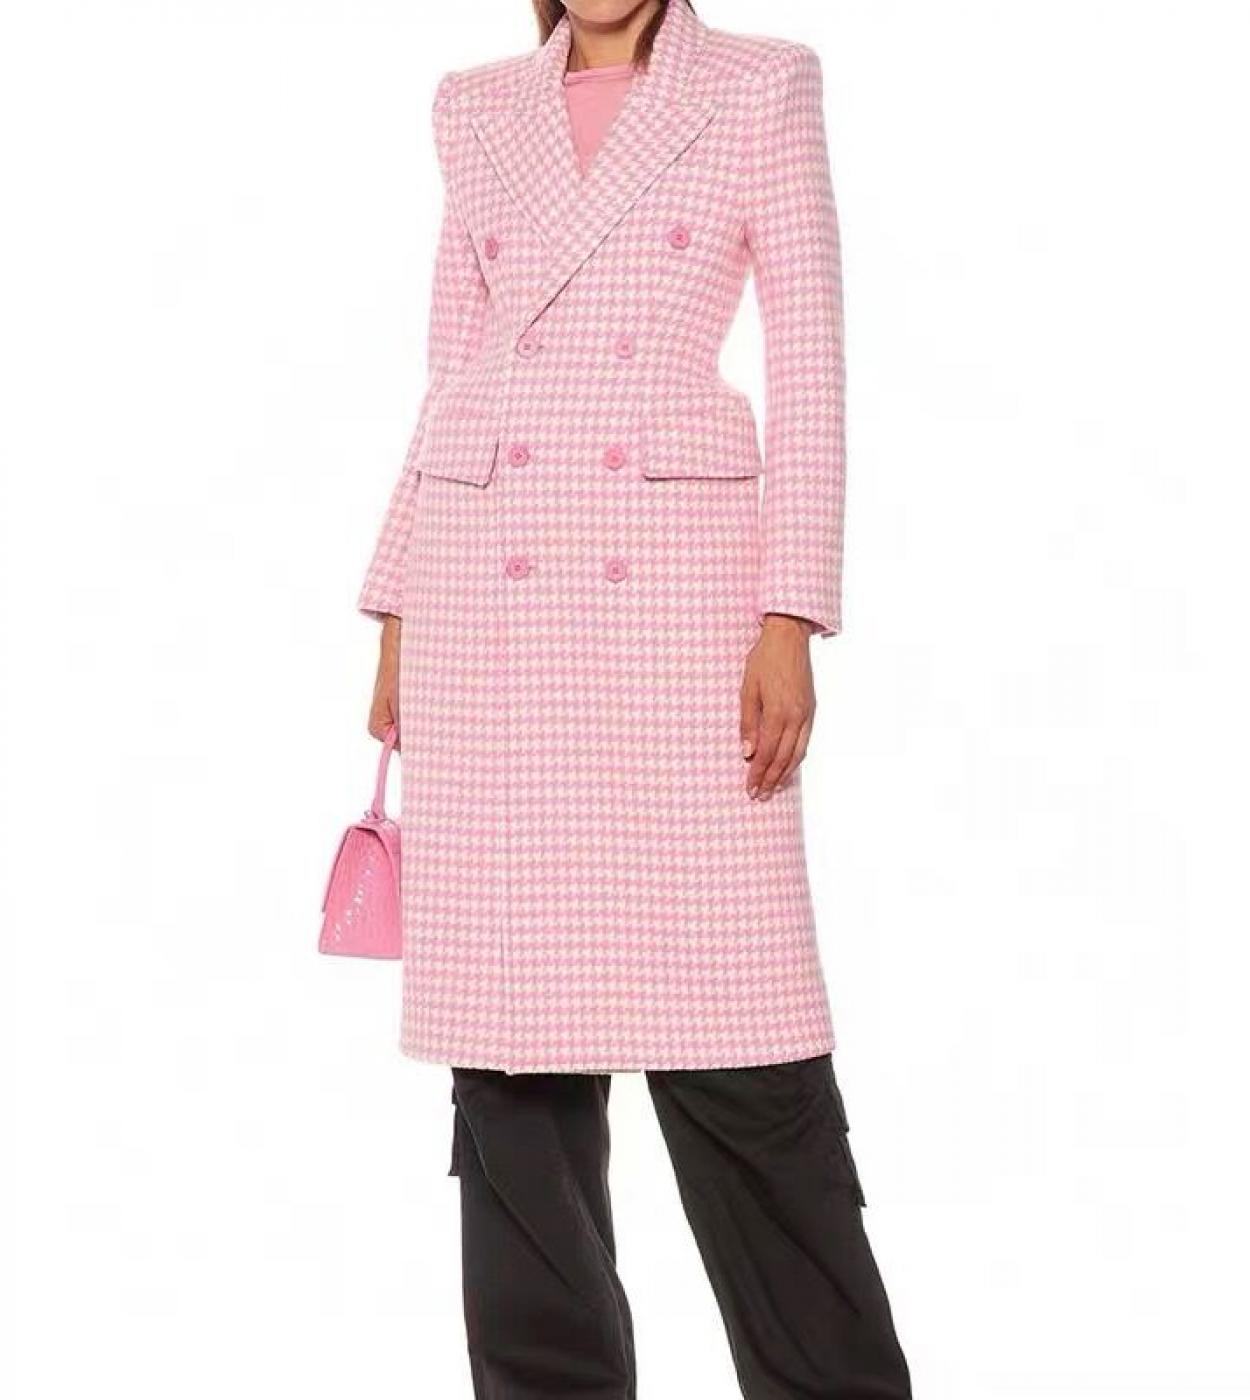 High Quality Winter  Fashion Designer Overcoat Womens Slim Fitting Double Breasted Pink Houndstooth Tweed Wool Long Coa